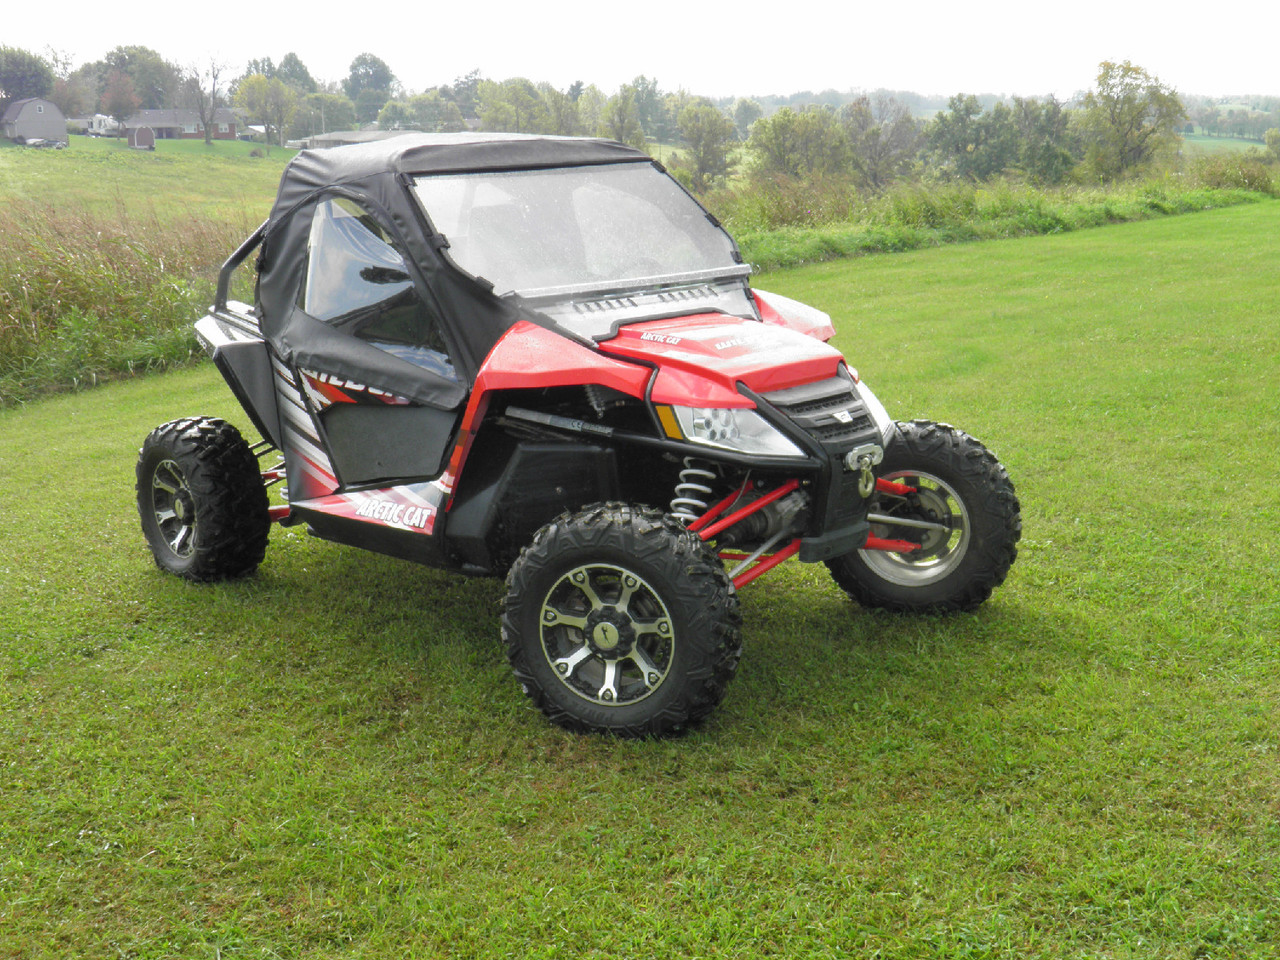 3 Star, side x side, side by side, utv, sxs, accessories, arctic cat, textron, wildcat, x, 1000, wildcat x, wildcat 1000, full cab enclosure, front angle view